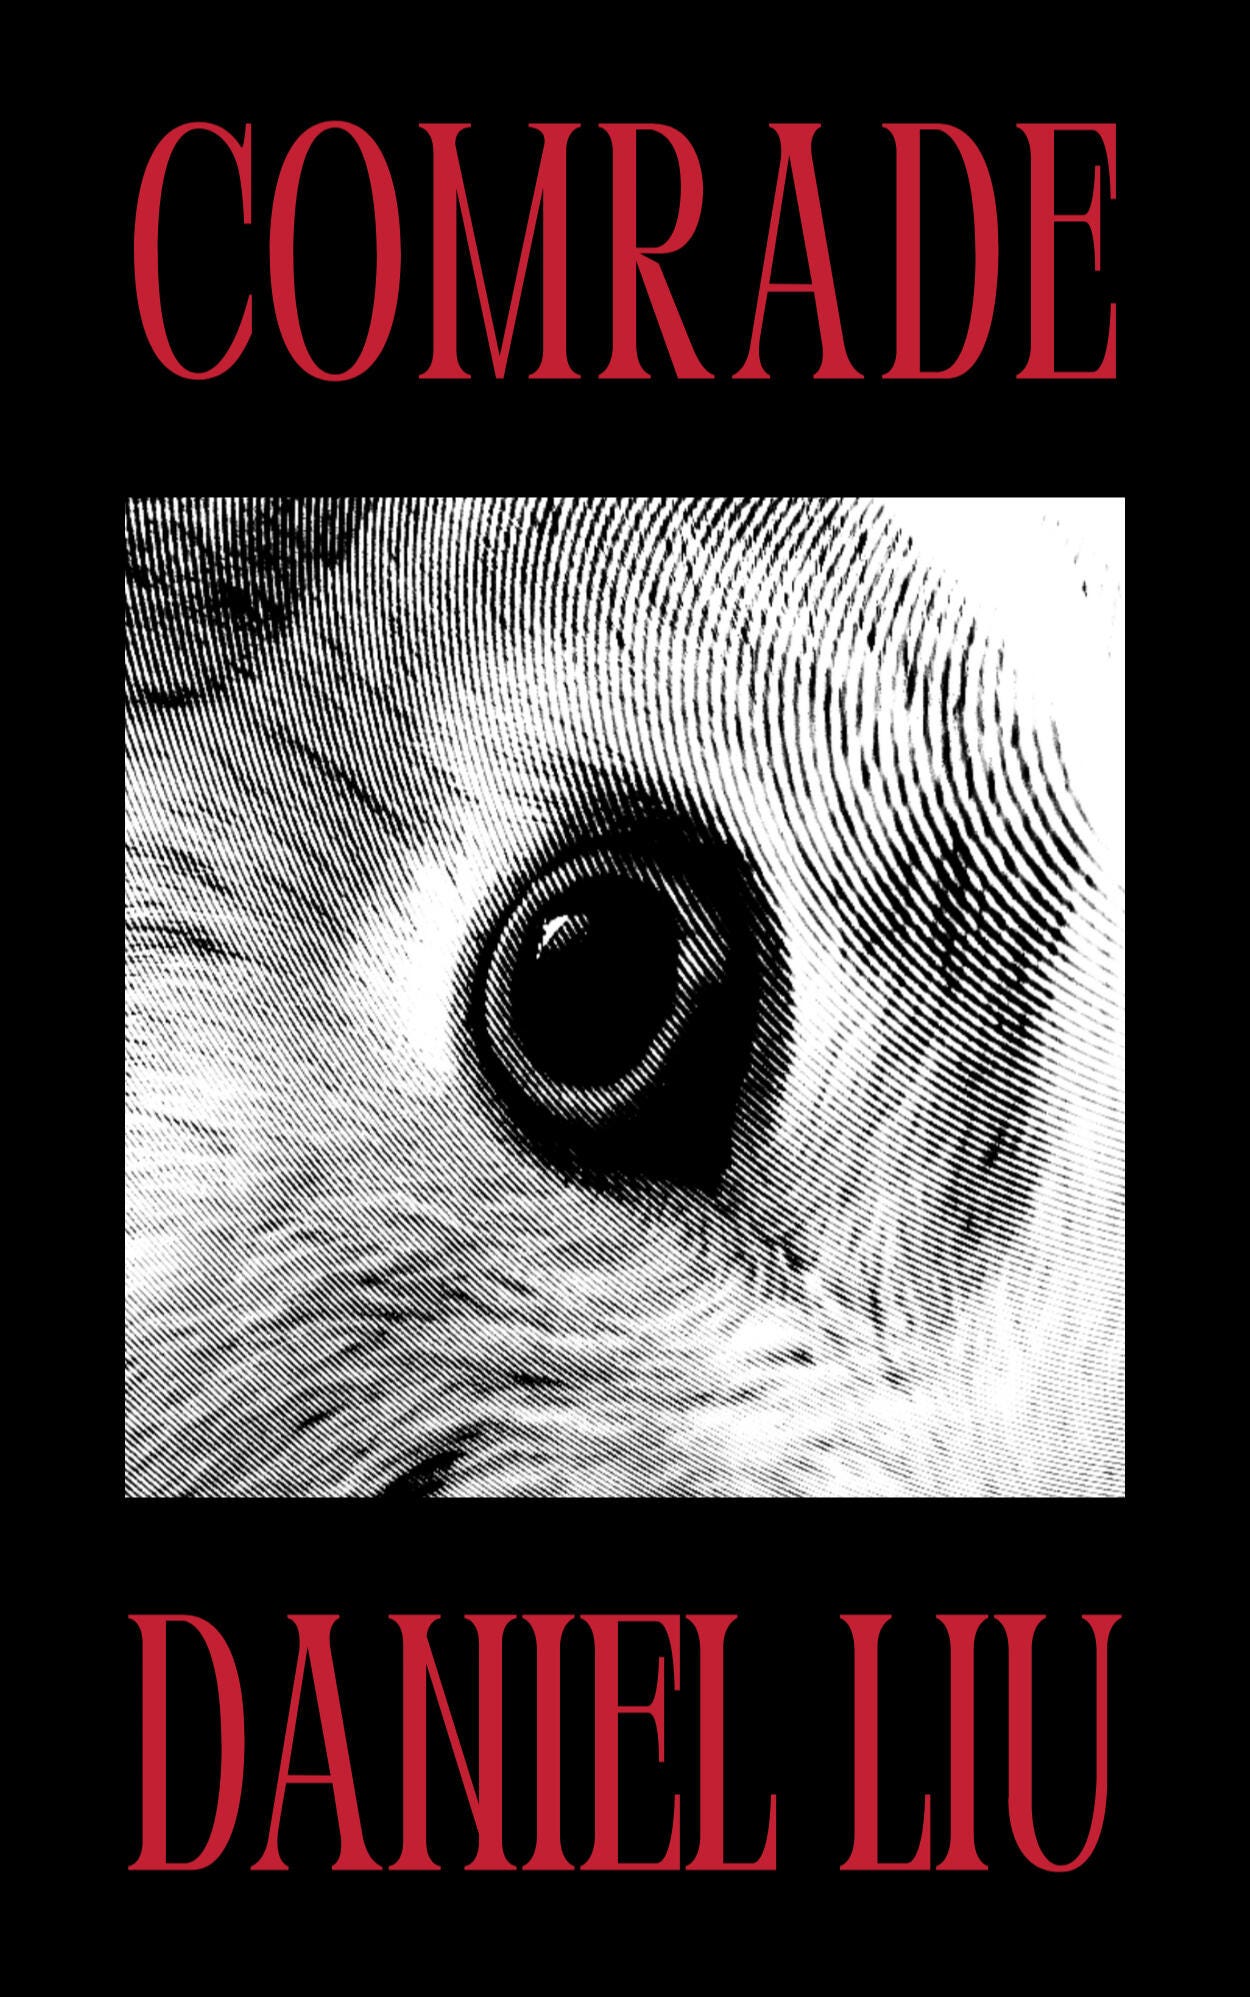 The word "COMRADE" is written in thin red capital letters against a black background. At the bottom the author's name is written in the same typeface. In the middle is a black-and-white photo of a rabbit's eye, zoomed in for dramatic effect.